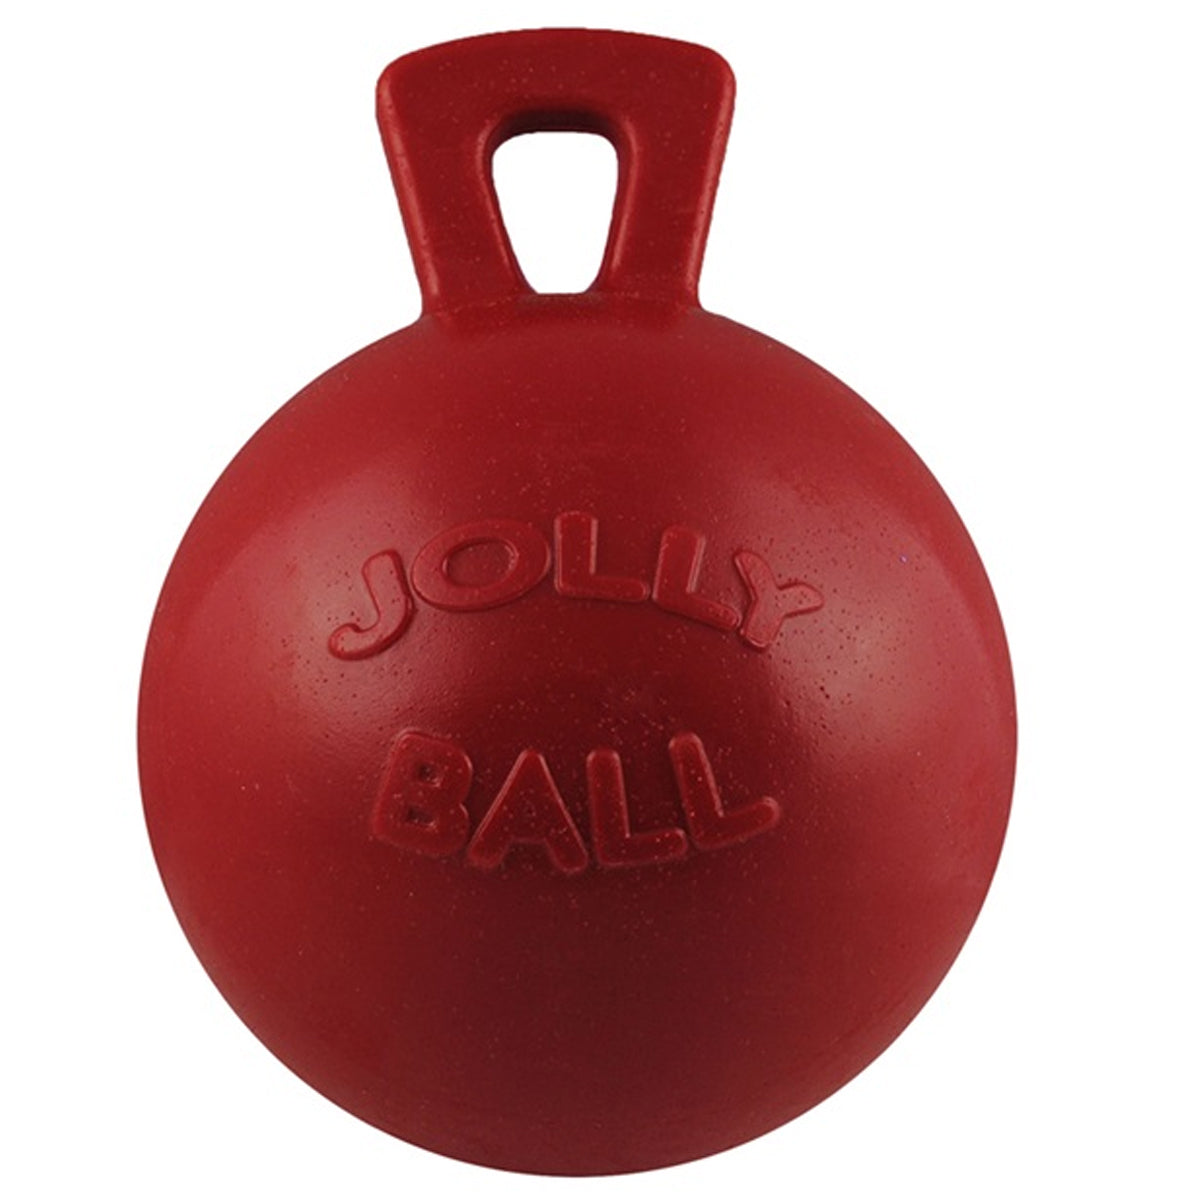 Jolly Ball with 10" Handle